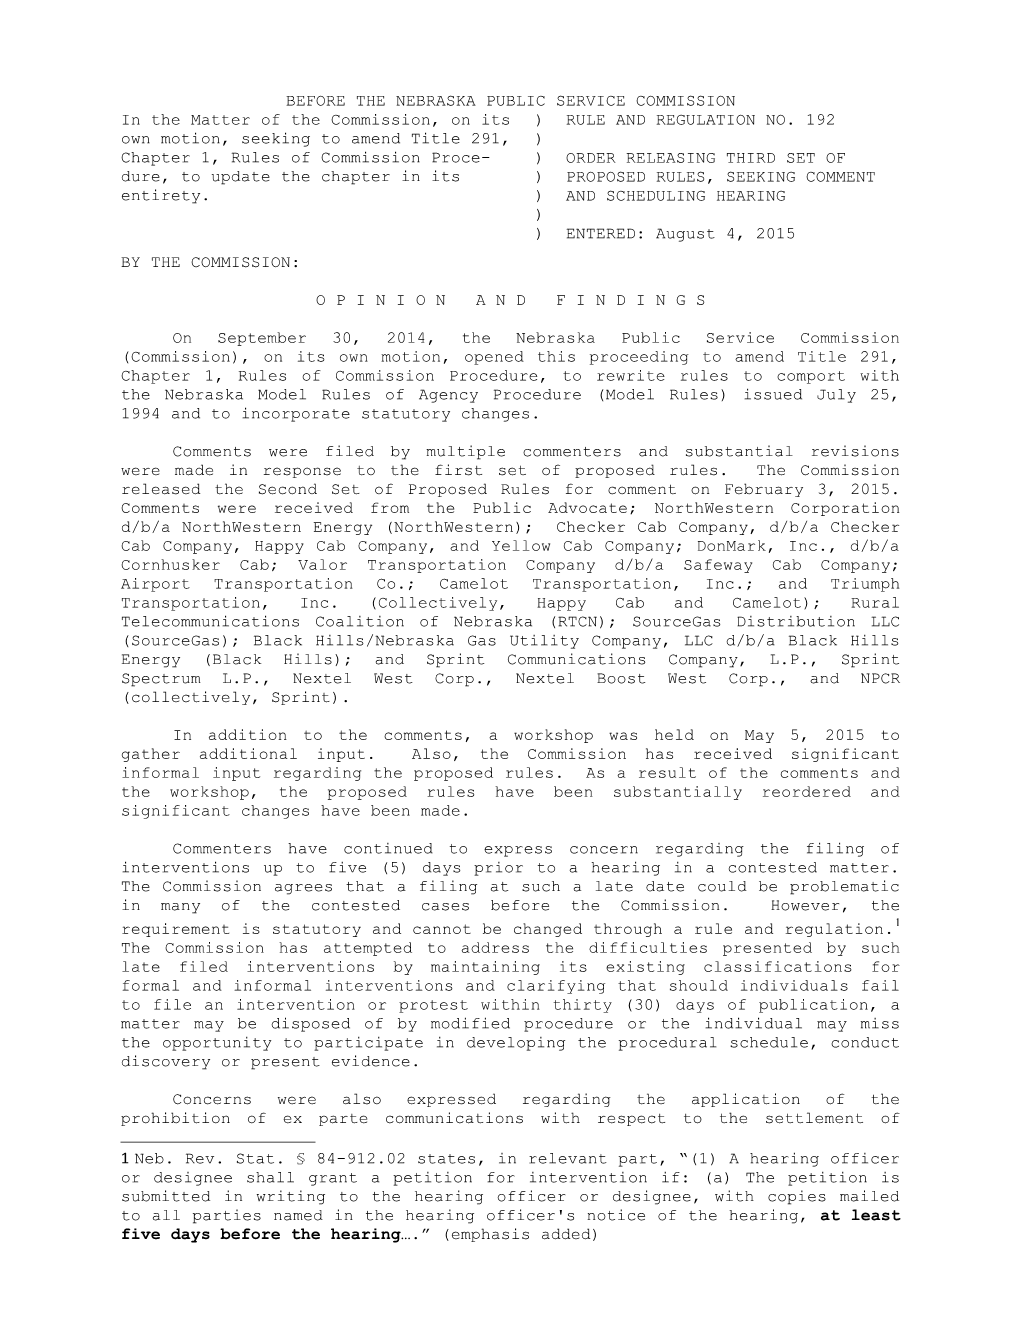 Rule and Regulation No. 192 Page 2